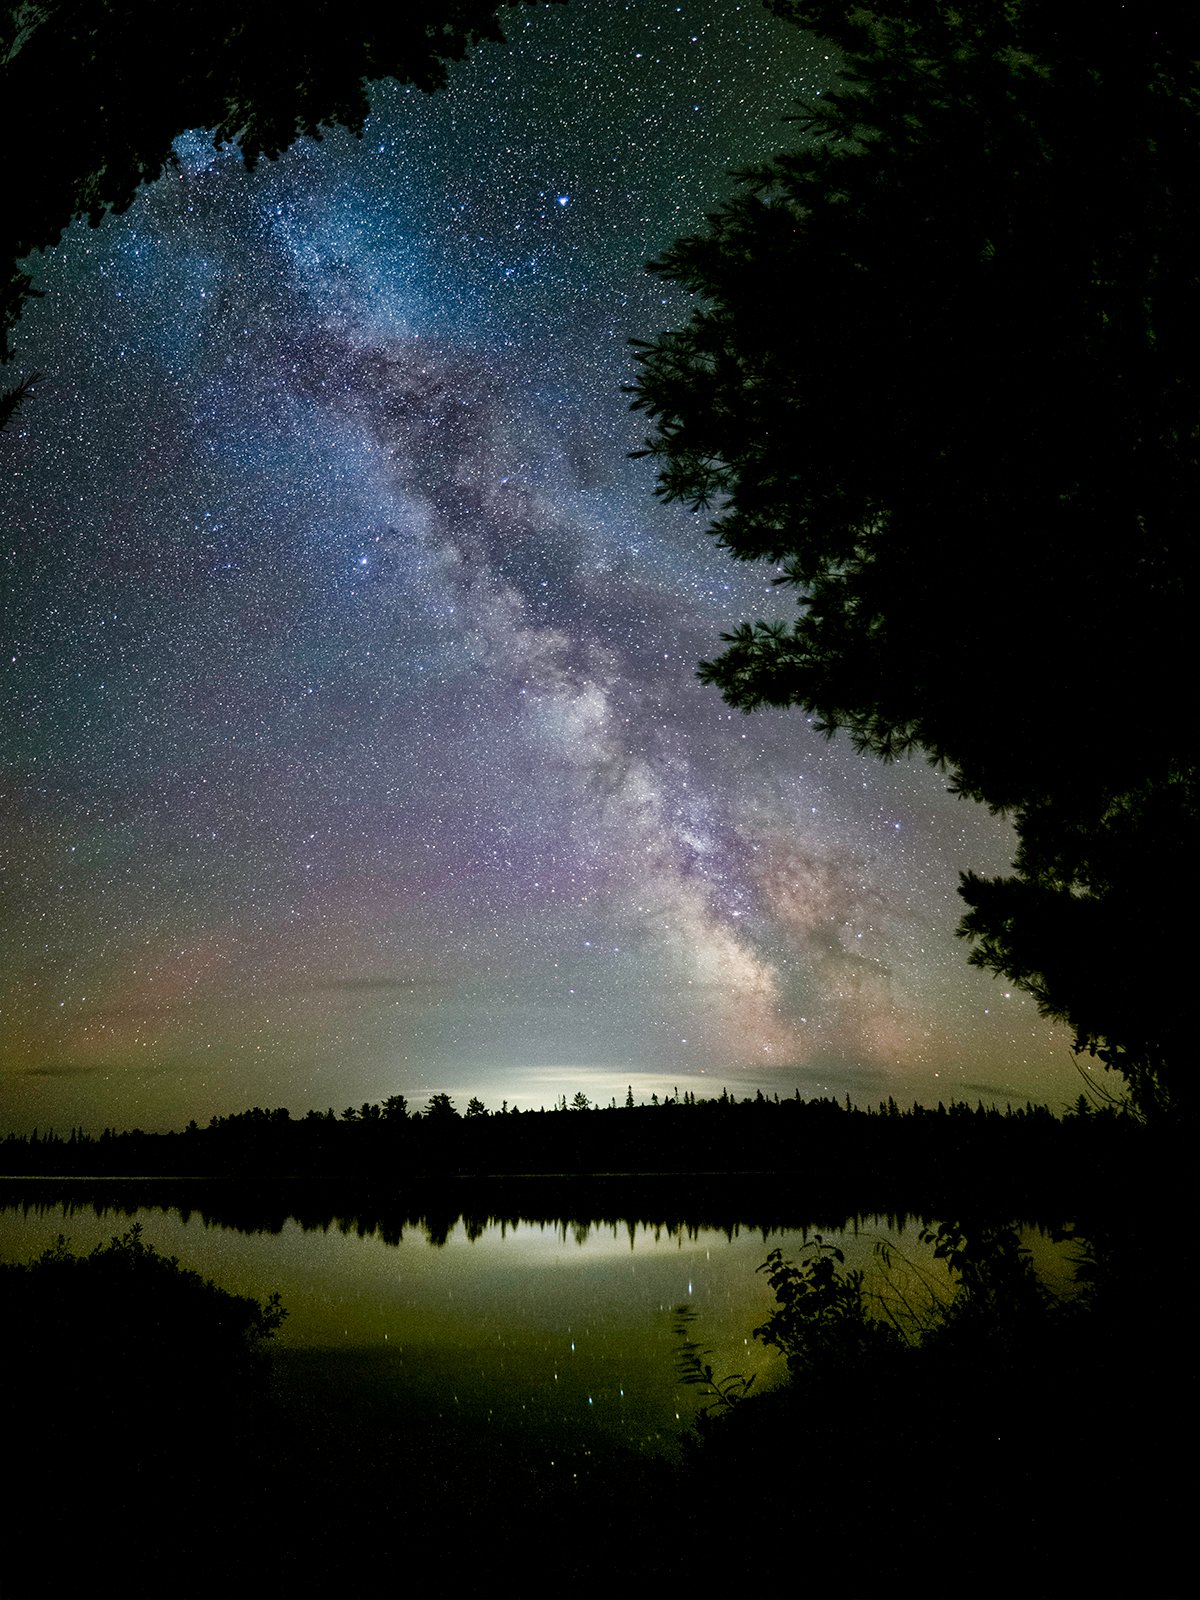 A Complete Guide to Capturing Gorgeous Photos of the Night Sky | PetaPixel